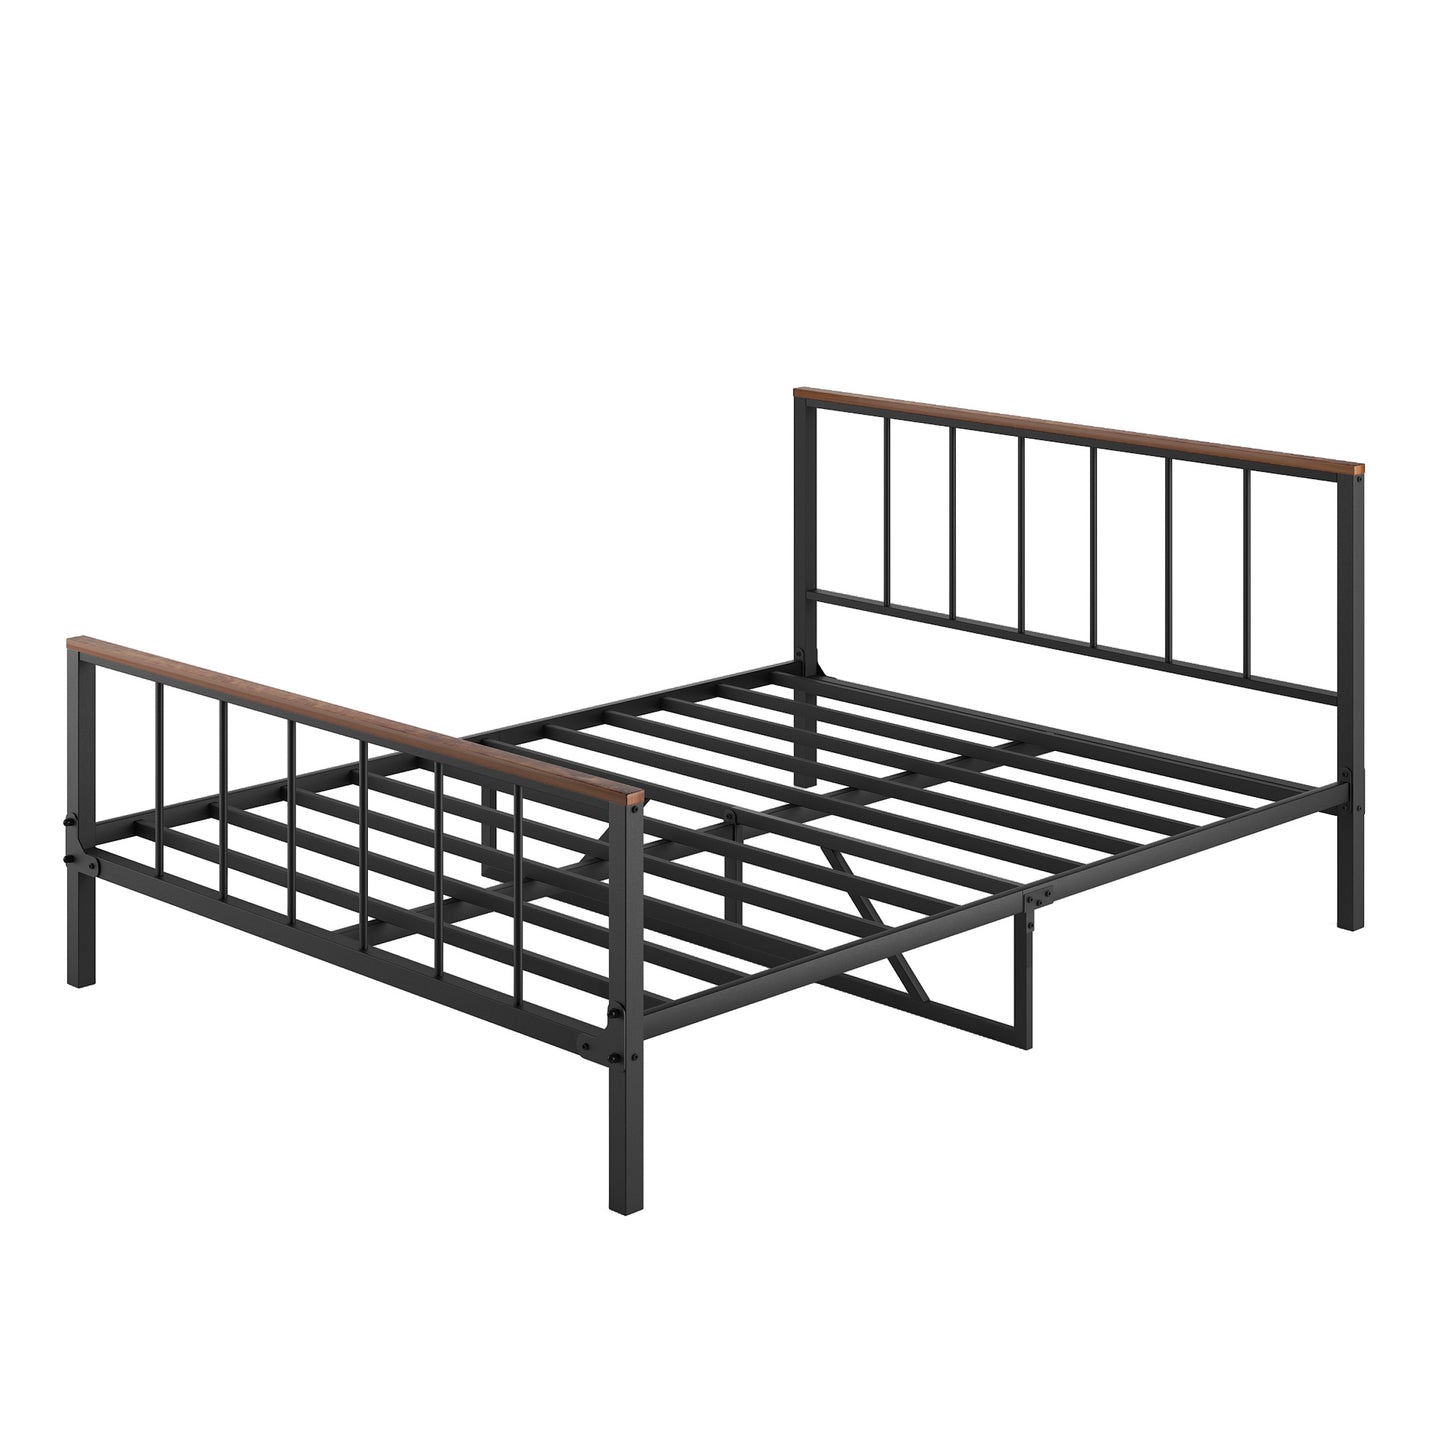 Metal Platform Bed frame with Headboard and Footboard,Sturdy Metal Frame,No Box Spring Needed(Queen)